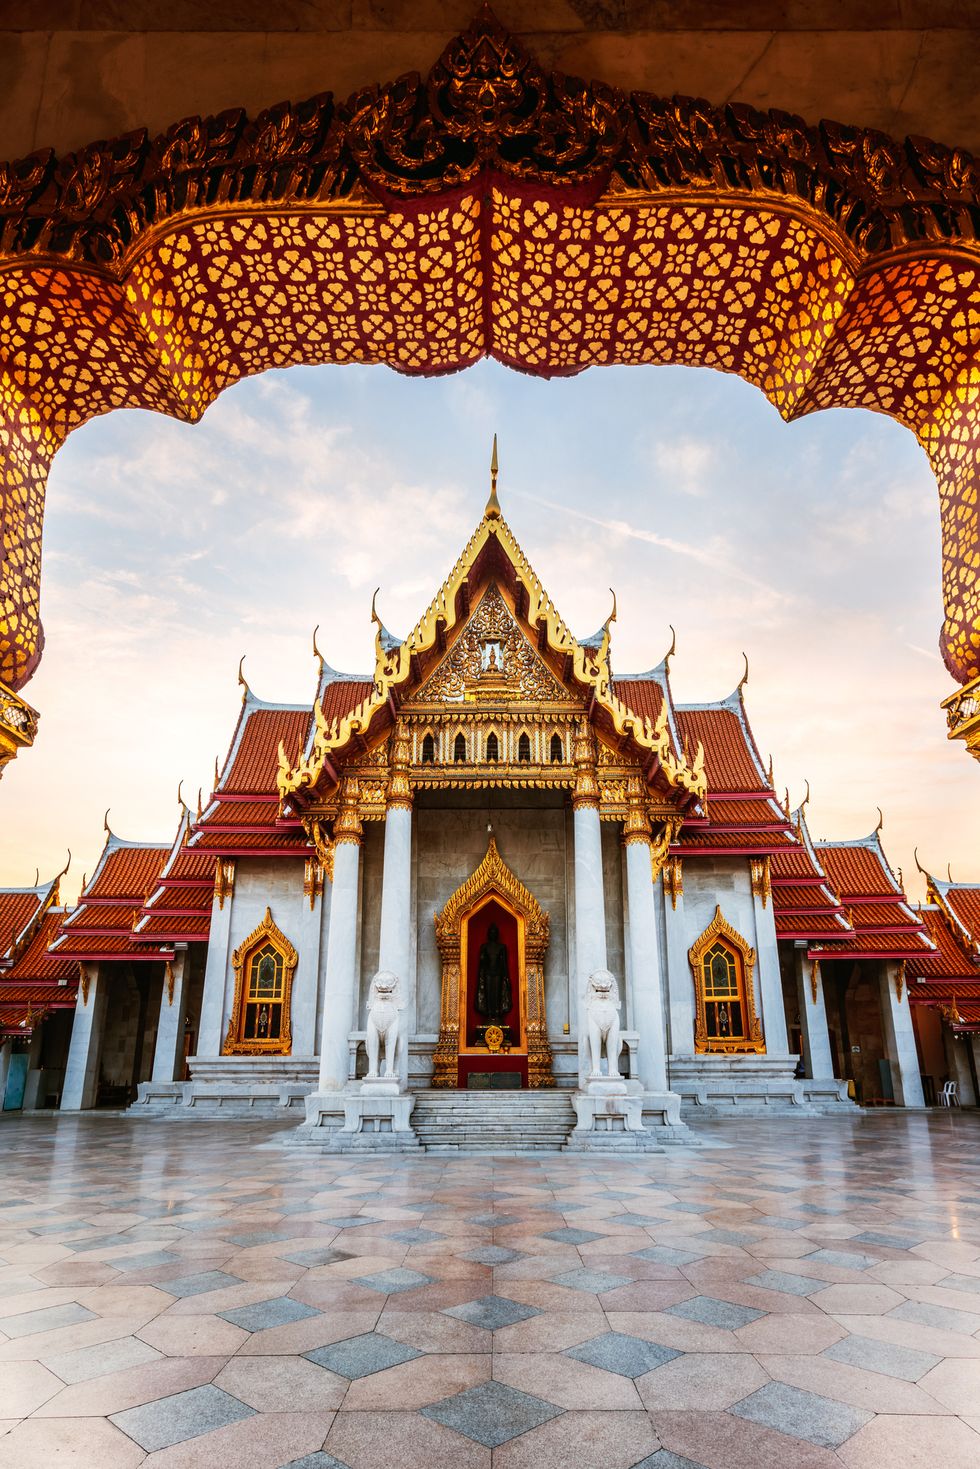 sunrise at marble temple, thailand with an exterior of gold arches and dorrways, white marble columns and geometrically tiled marble courtyard